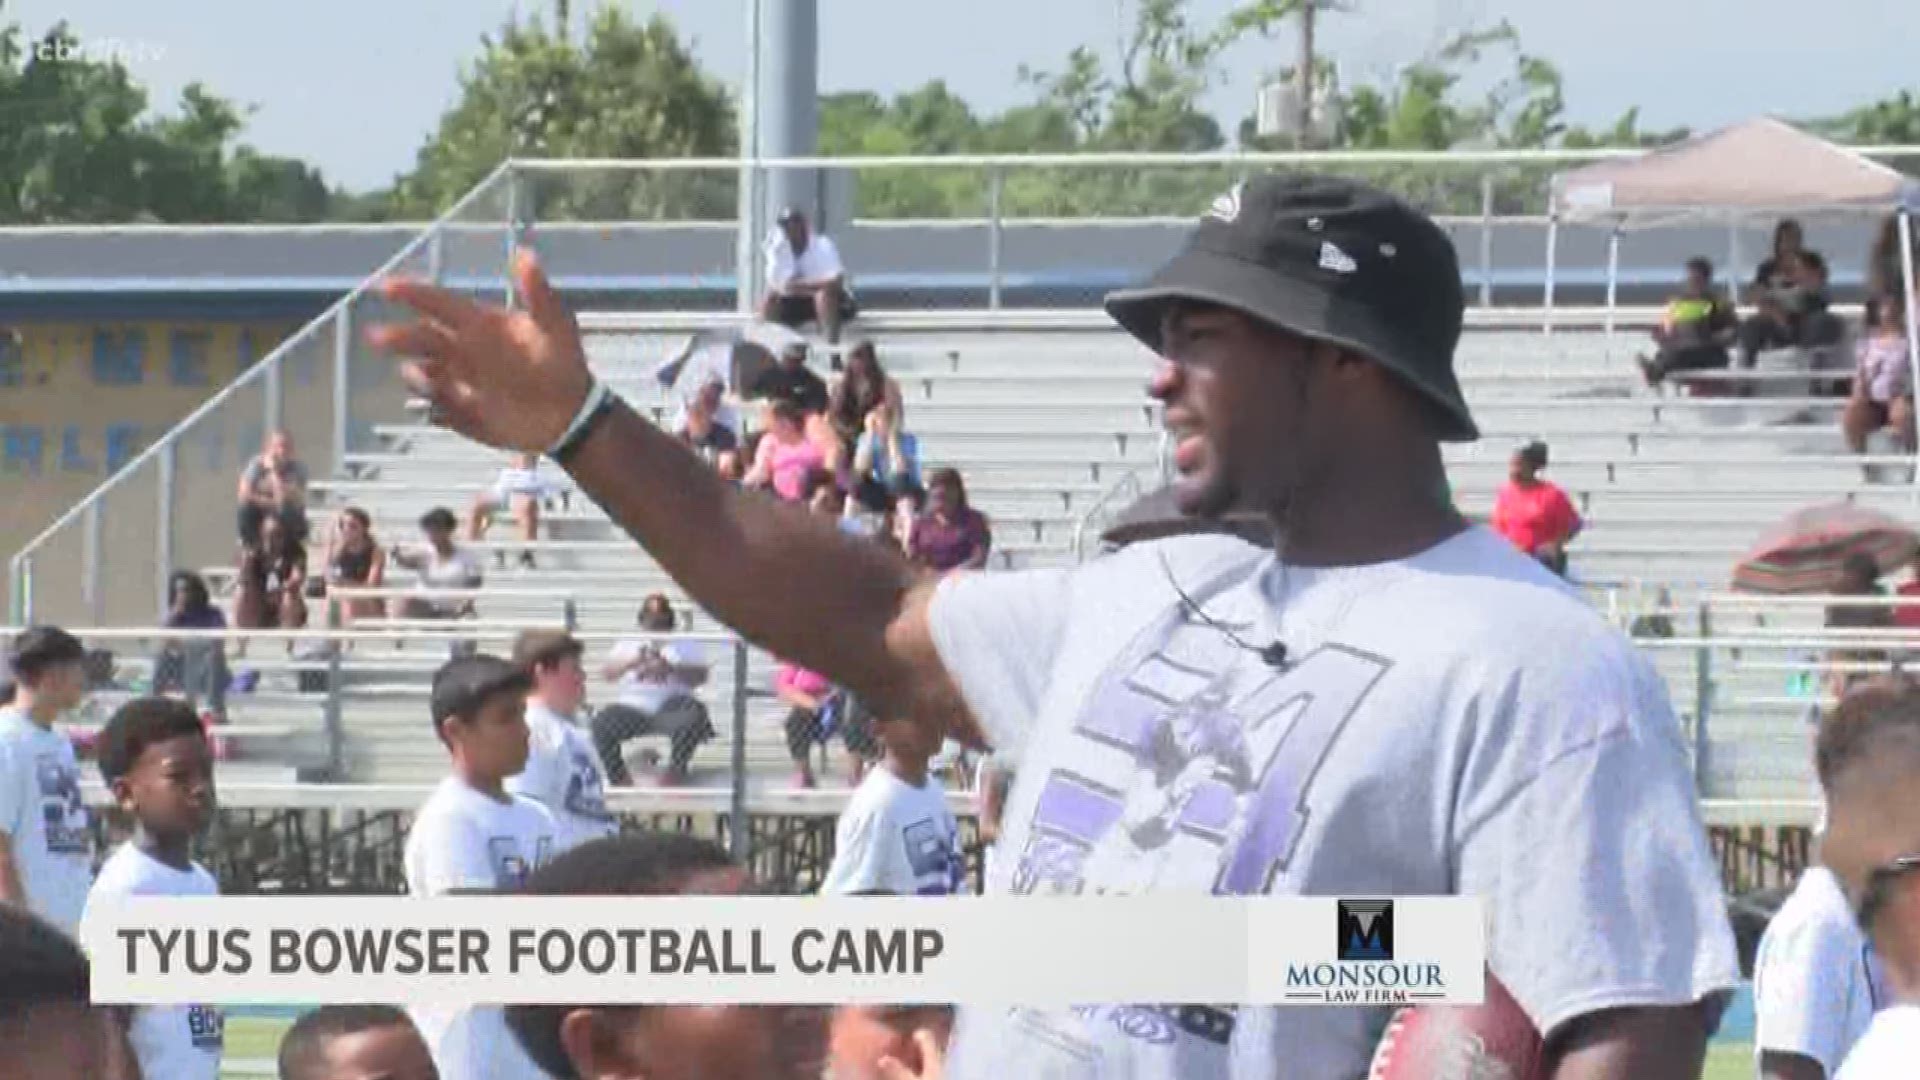 There were all sorts of former John Tyler Lions that returned to their alma mater Saturday Morning for the 2nd Annual Tyus Bowser Football Camp. Along with Bowser, two time Super Bowl Champion Aaron Ross, Greg Ward Jr. & Justice Liggins showed up to help coach and mentor campers between the ages of 8-17.